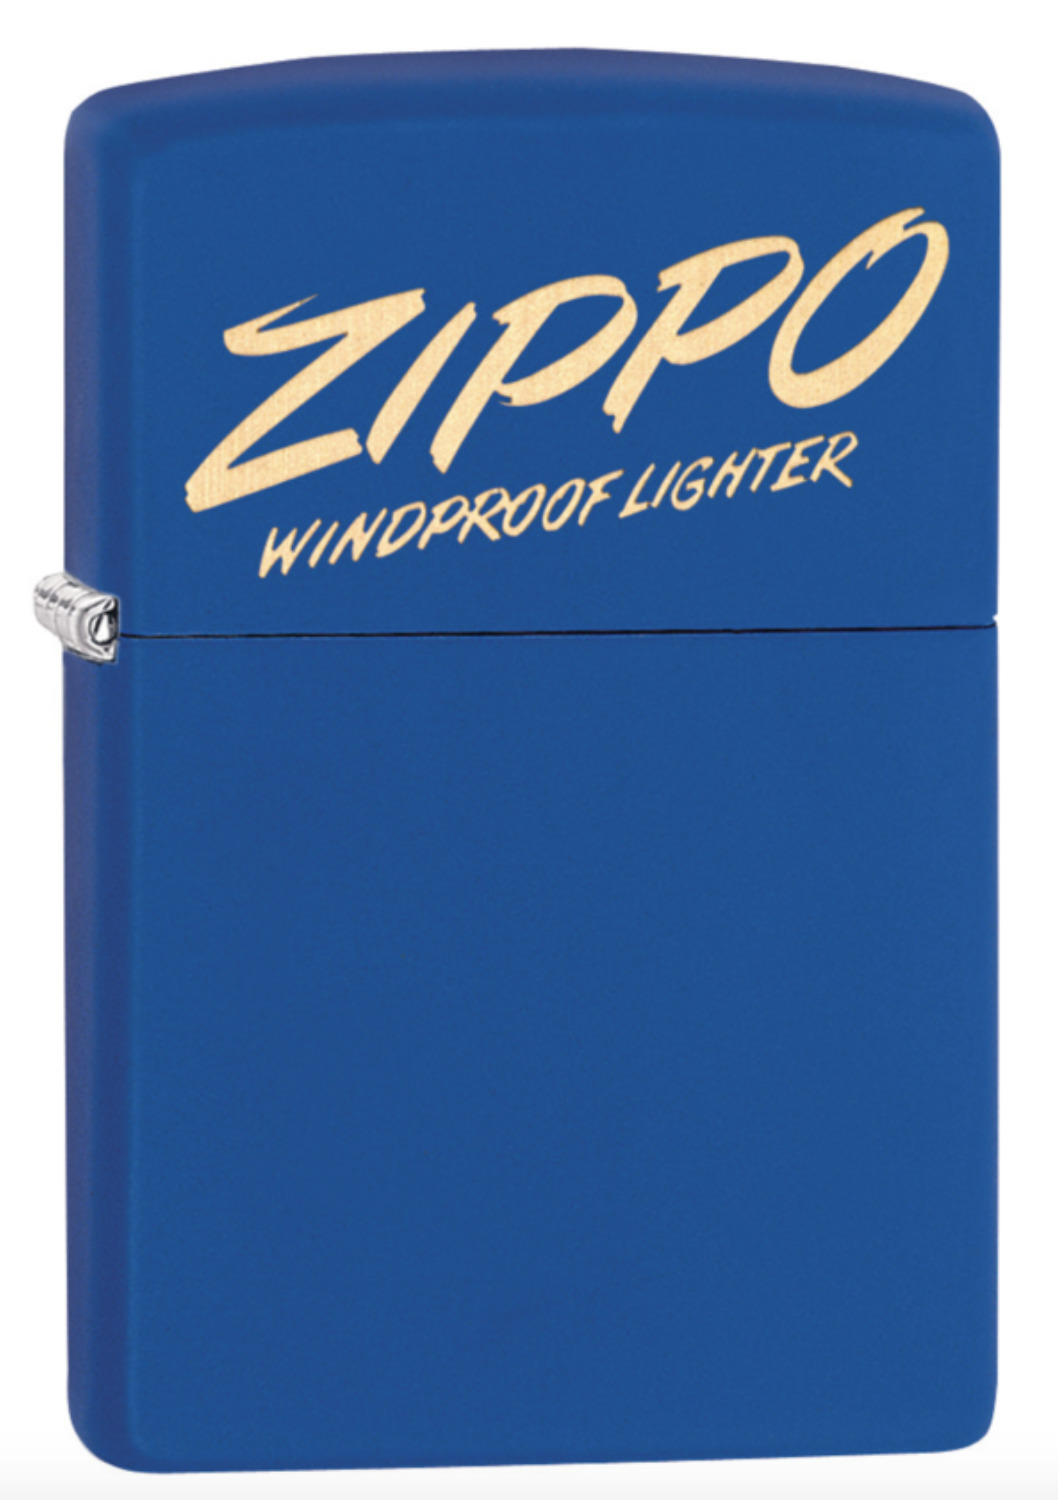 Zippo Windproof Lighter Royal Blue with Engraved Script Logo, 49223, New In Box